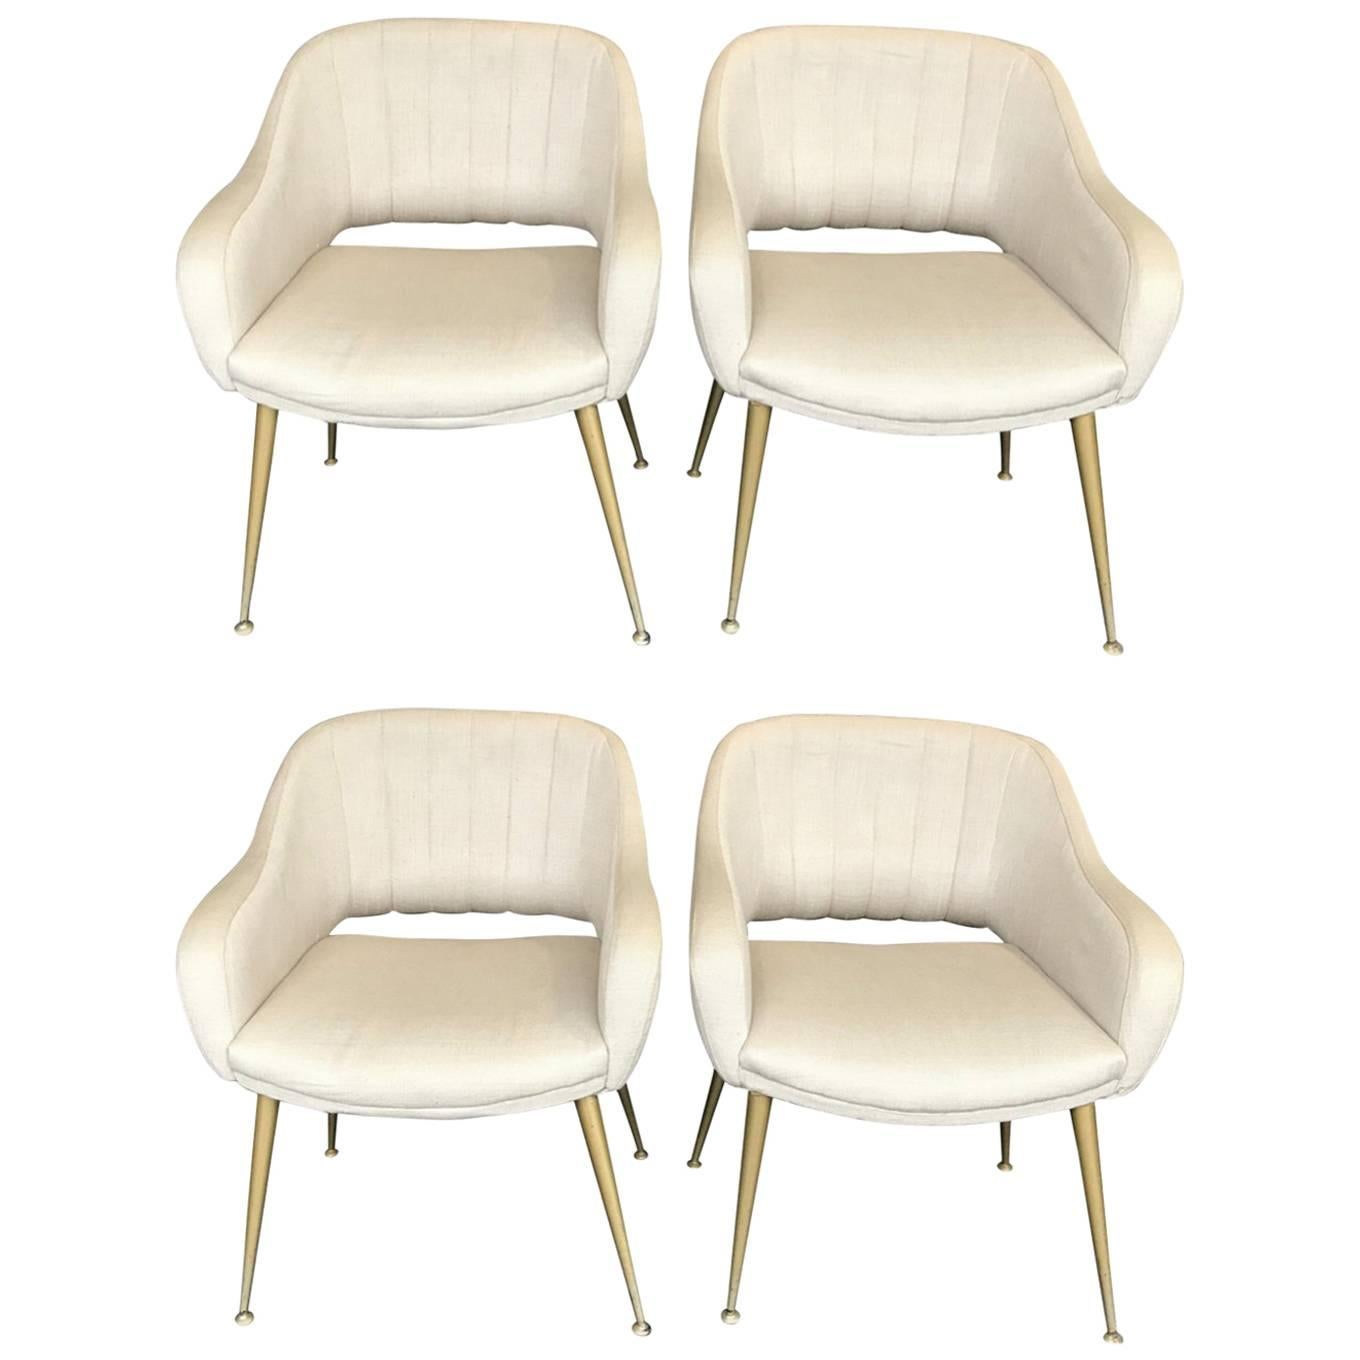 A pair if Italian cocktail chairs